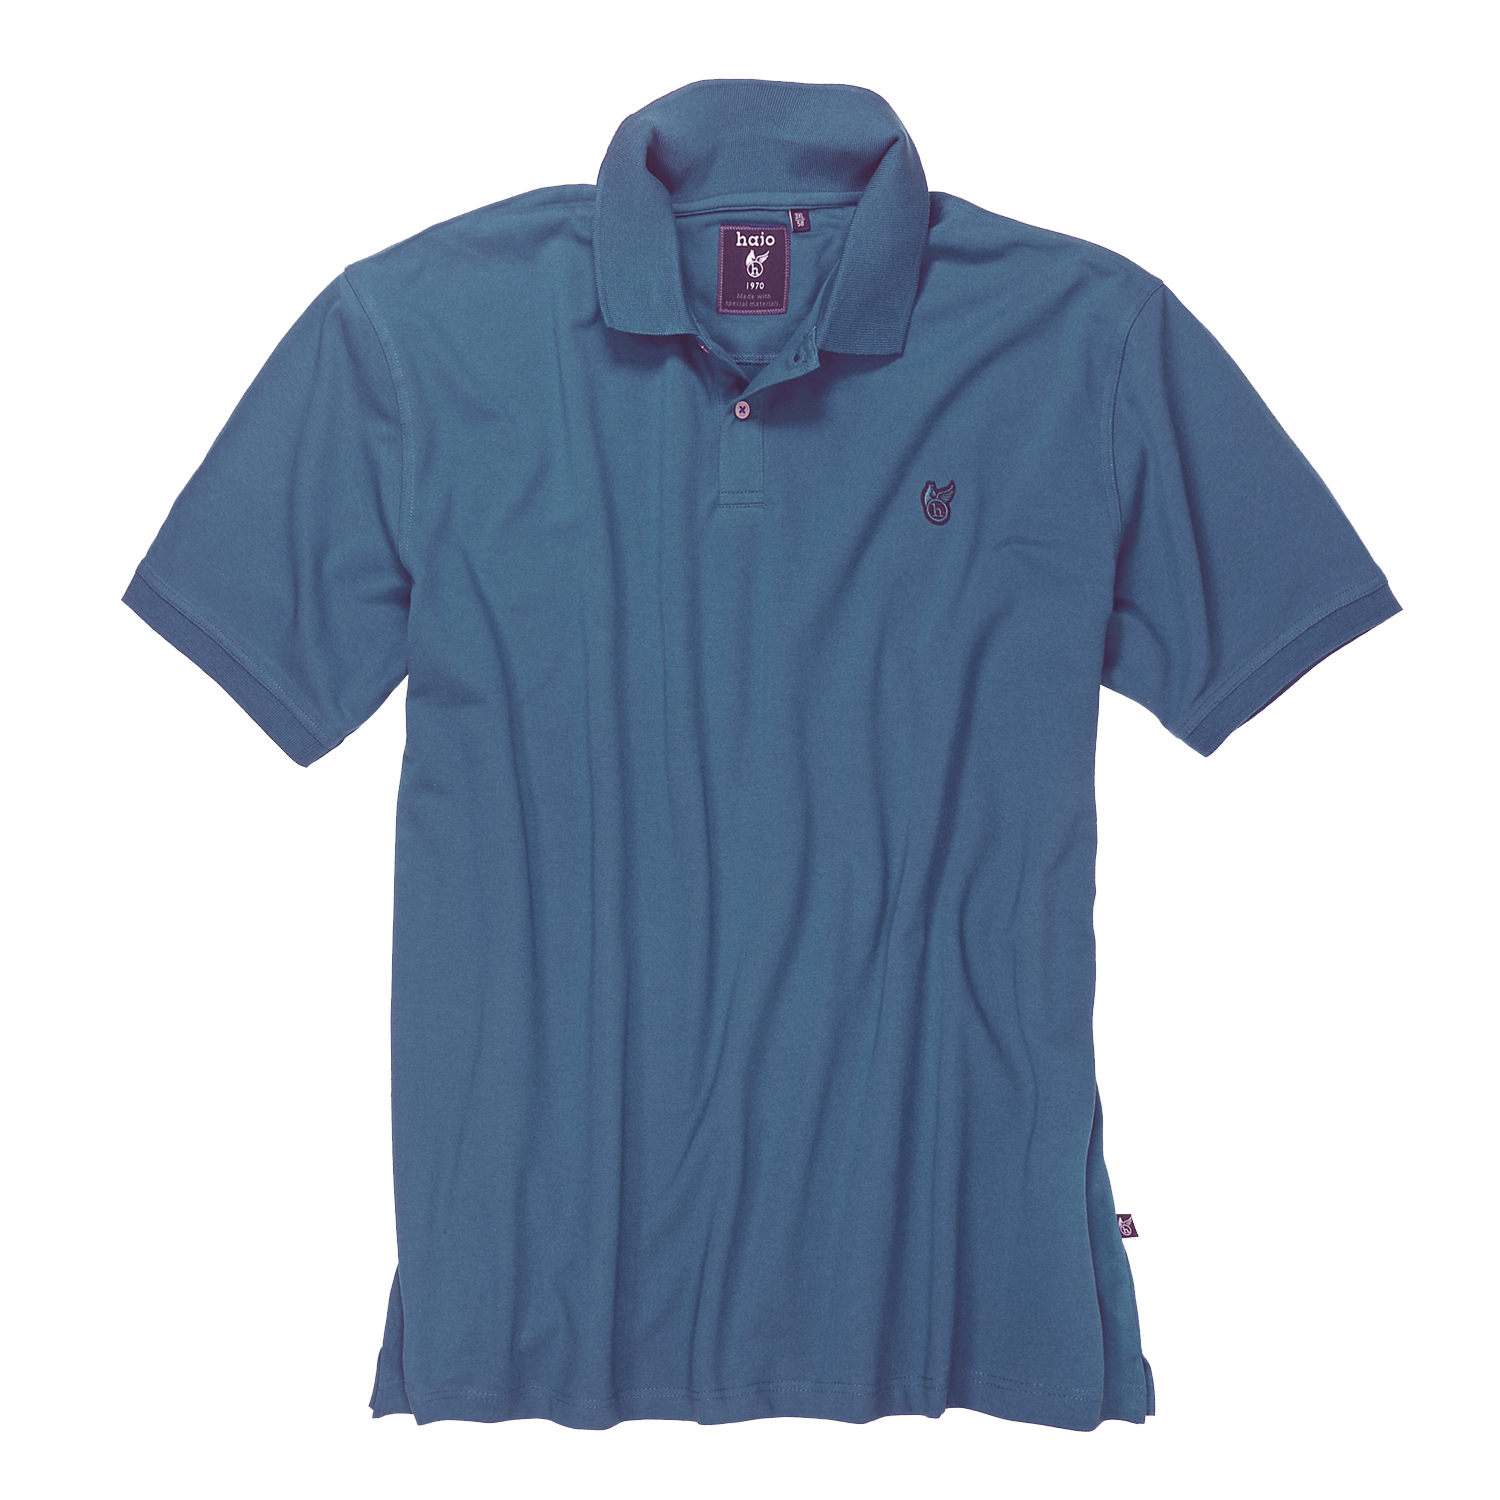 Polo shirt "stay fresh" in blue by hajo up to oversize 7XL